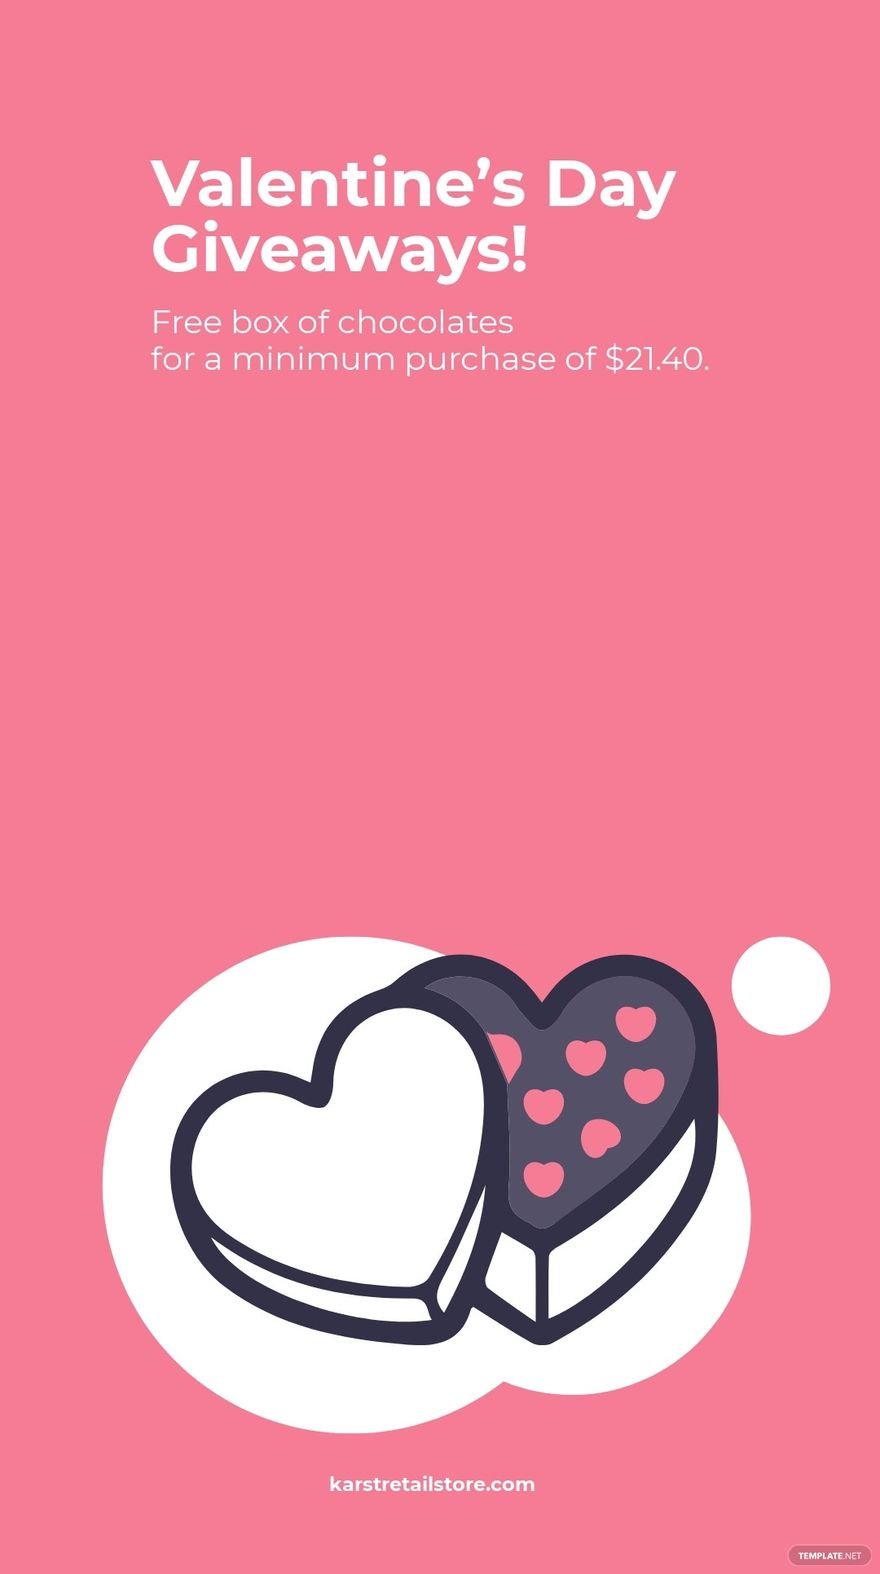 Valentine's Day Giveaway Snapchat Geofilter